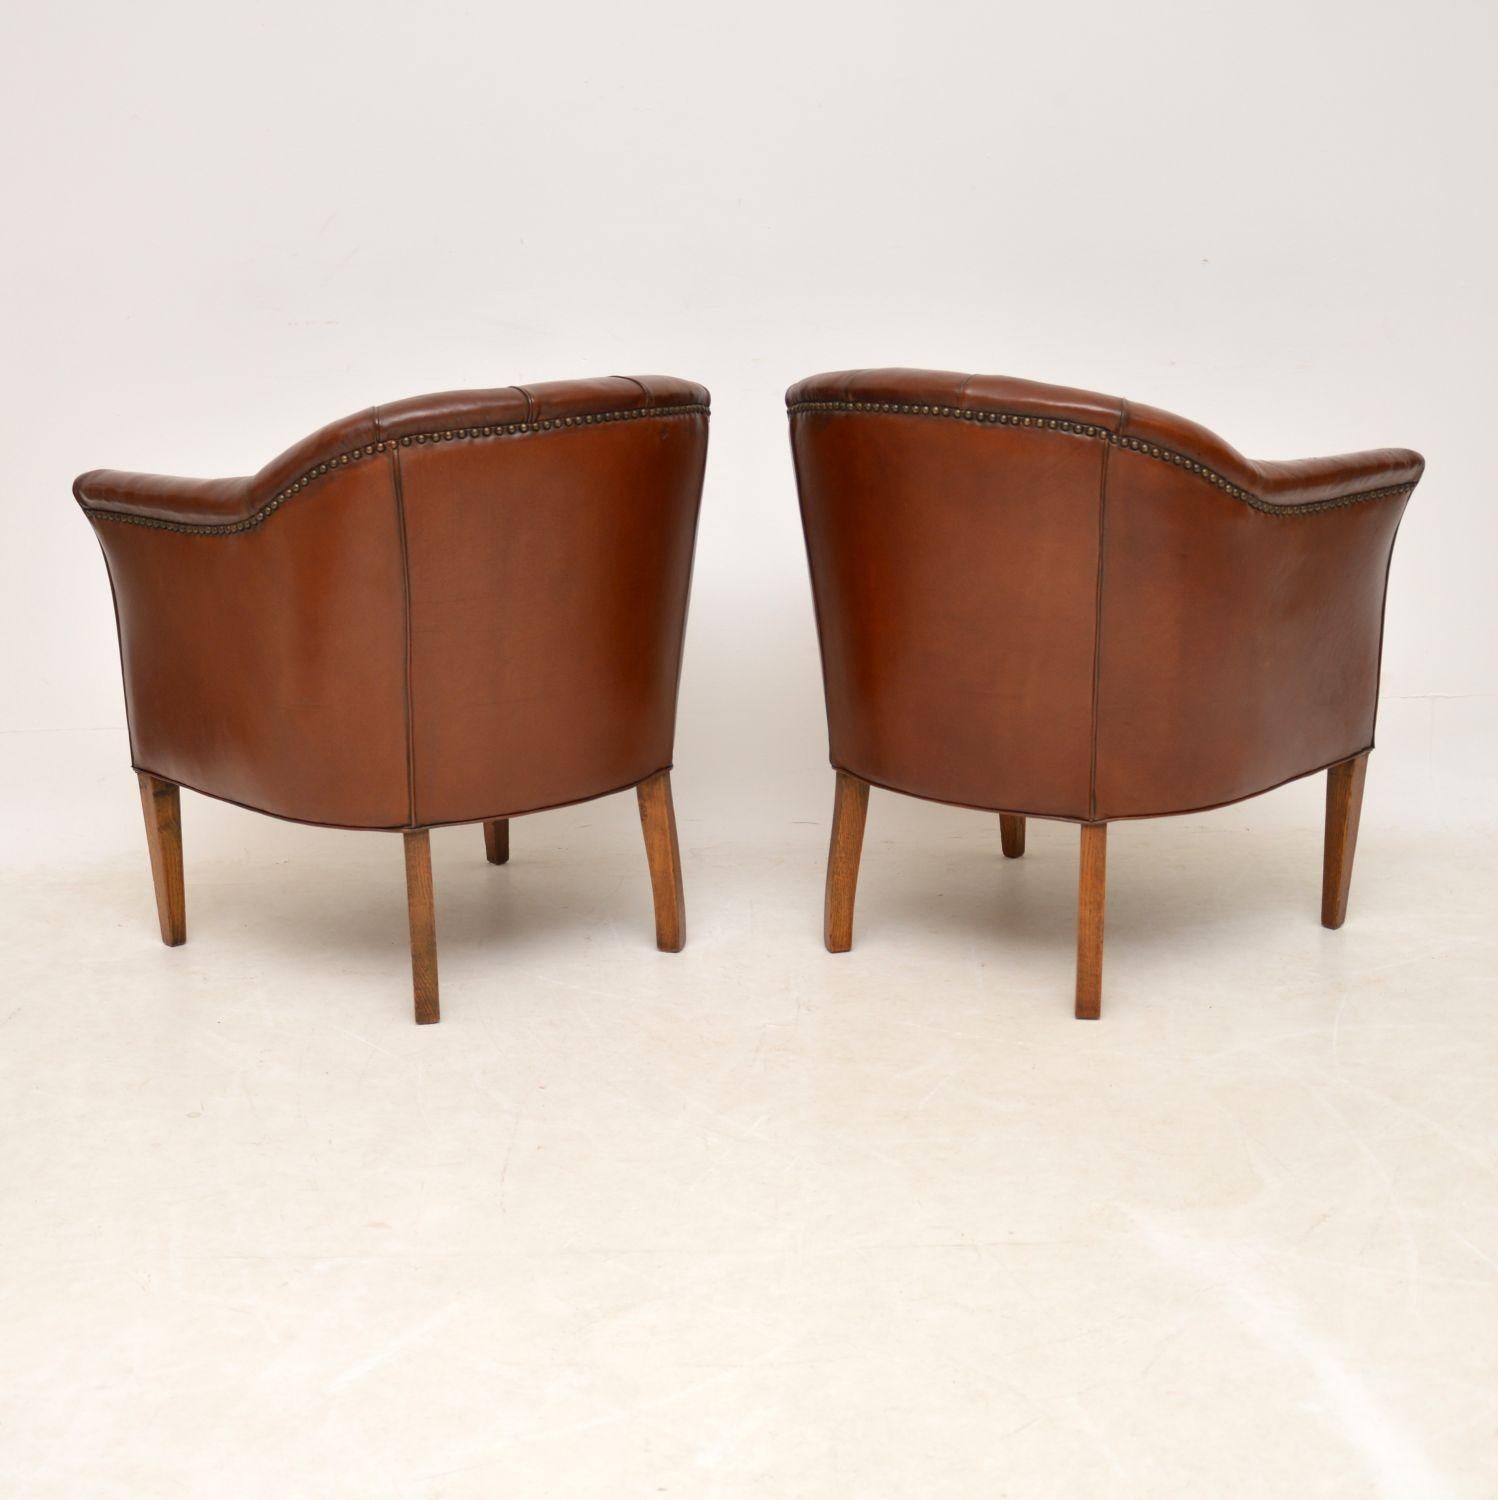 20th Century Pair of Antique Swedish Deep Buttoned Leather Armchairs